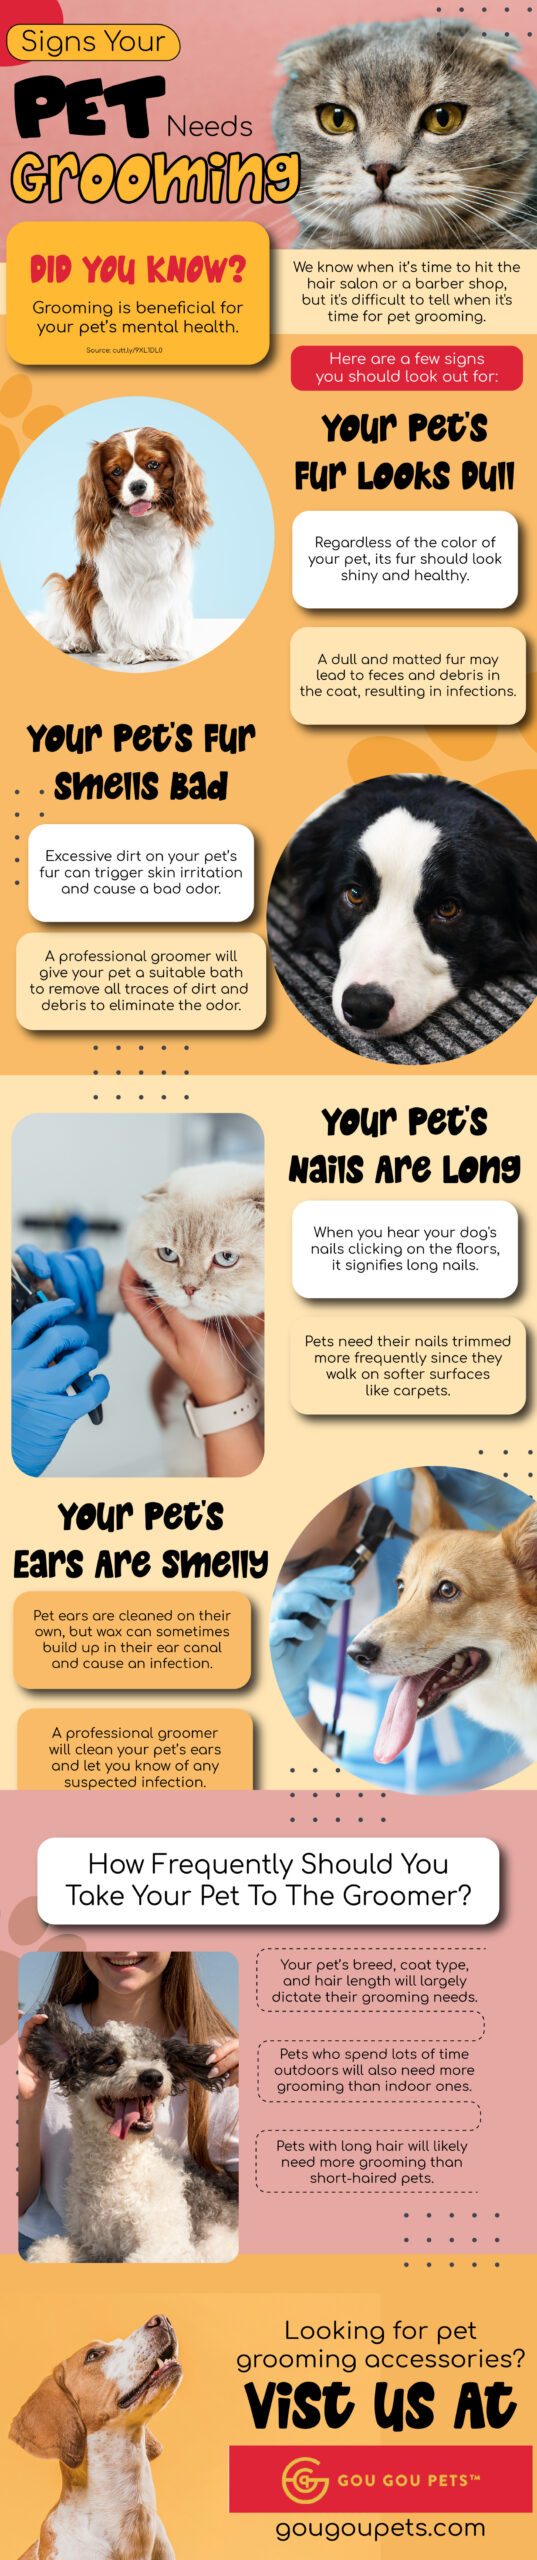 Signs Your Pet Needs Grooming